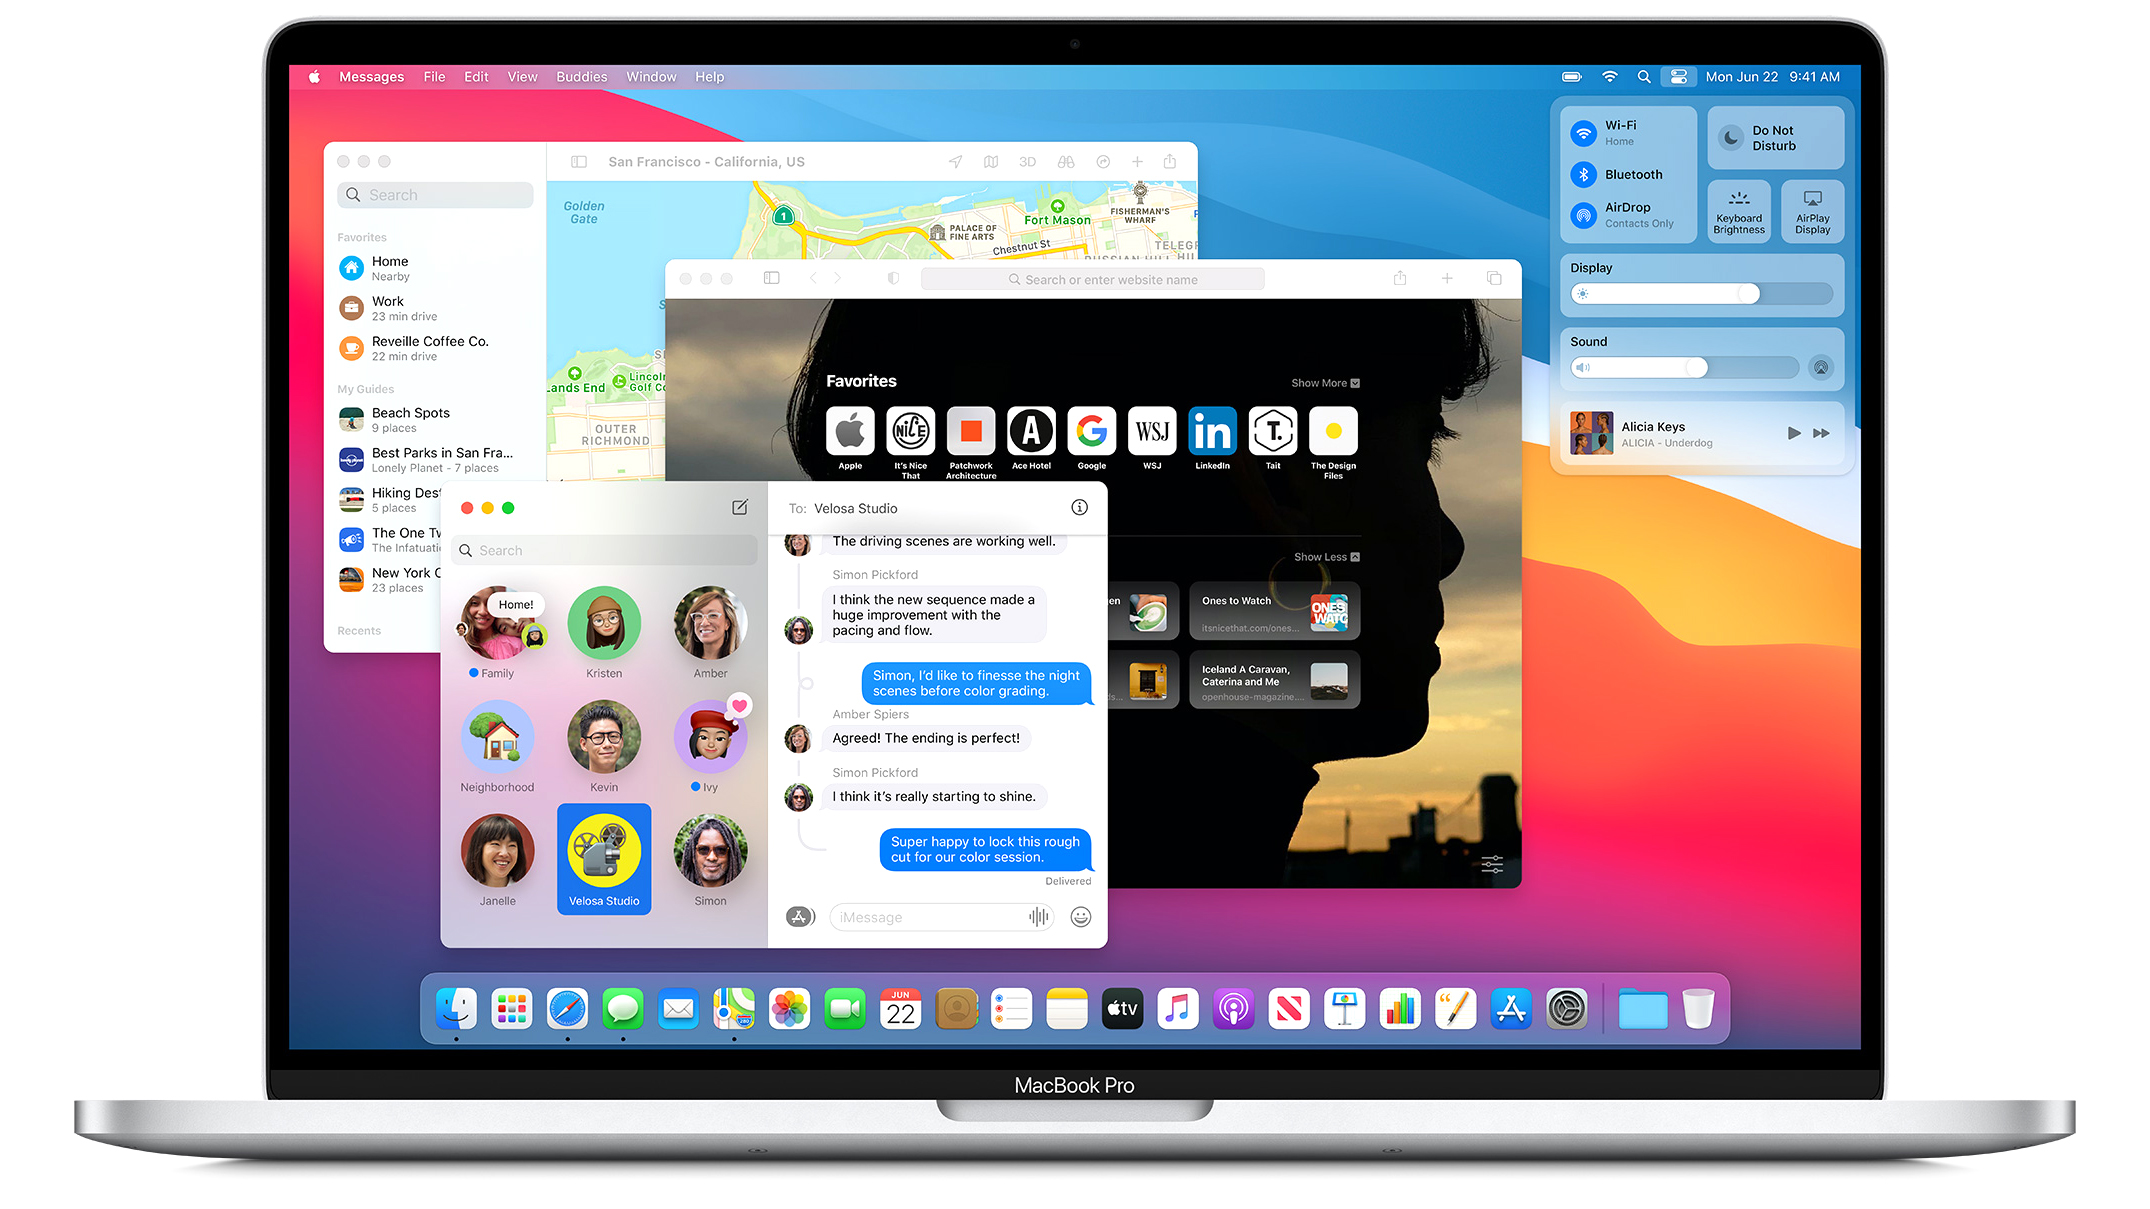 The Next Version of macOS is Called Big Sur and It’s Getting a Very iOS Facelift